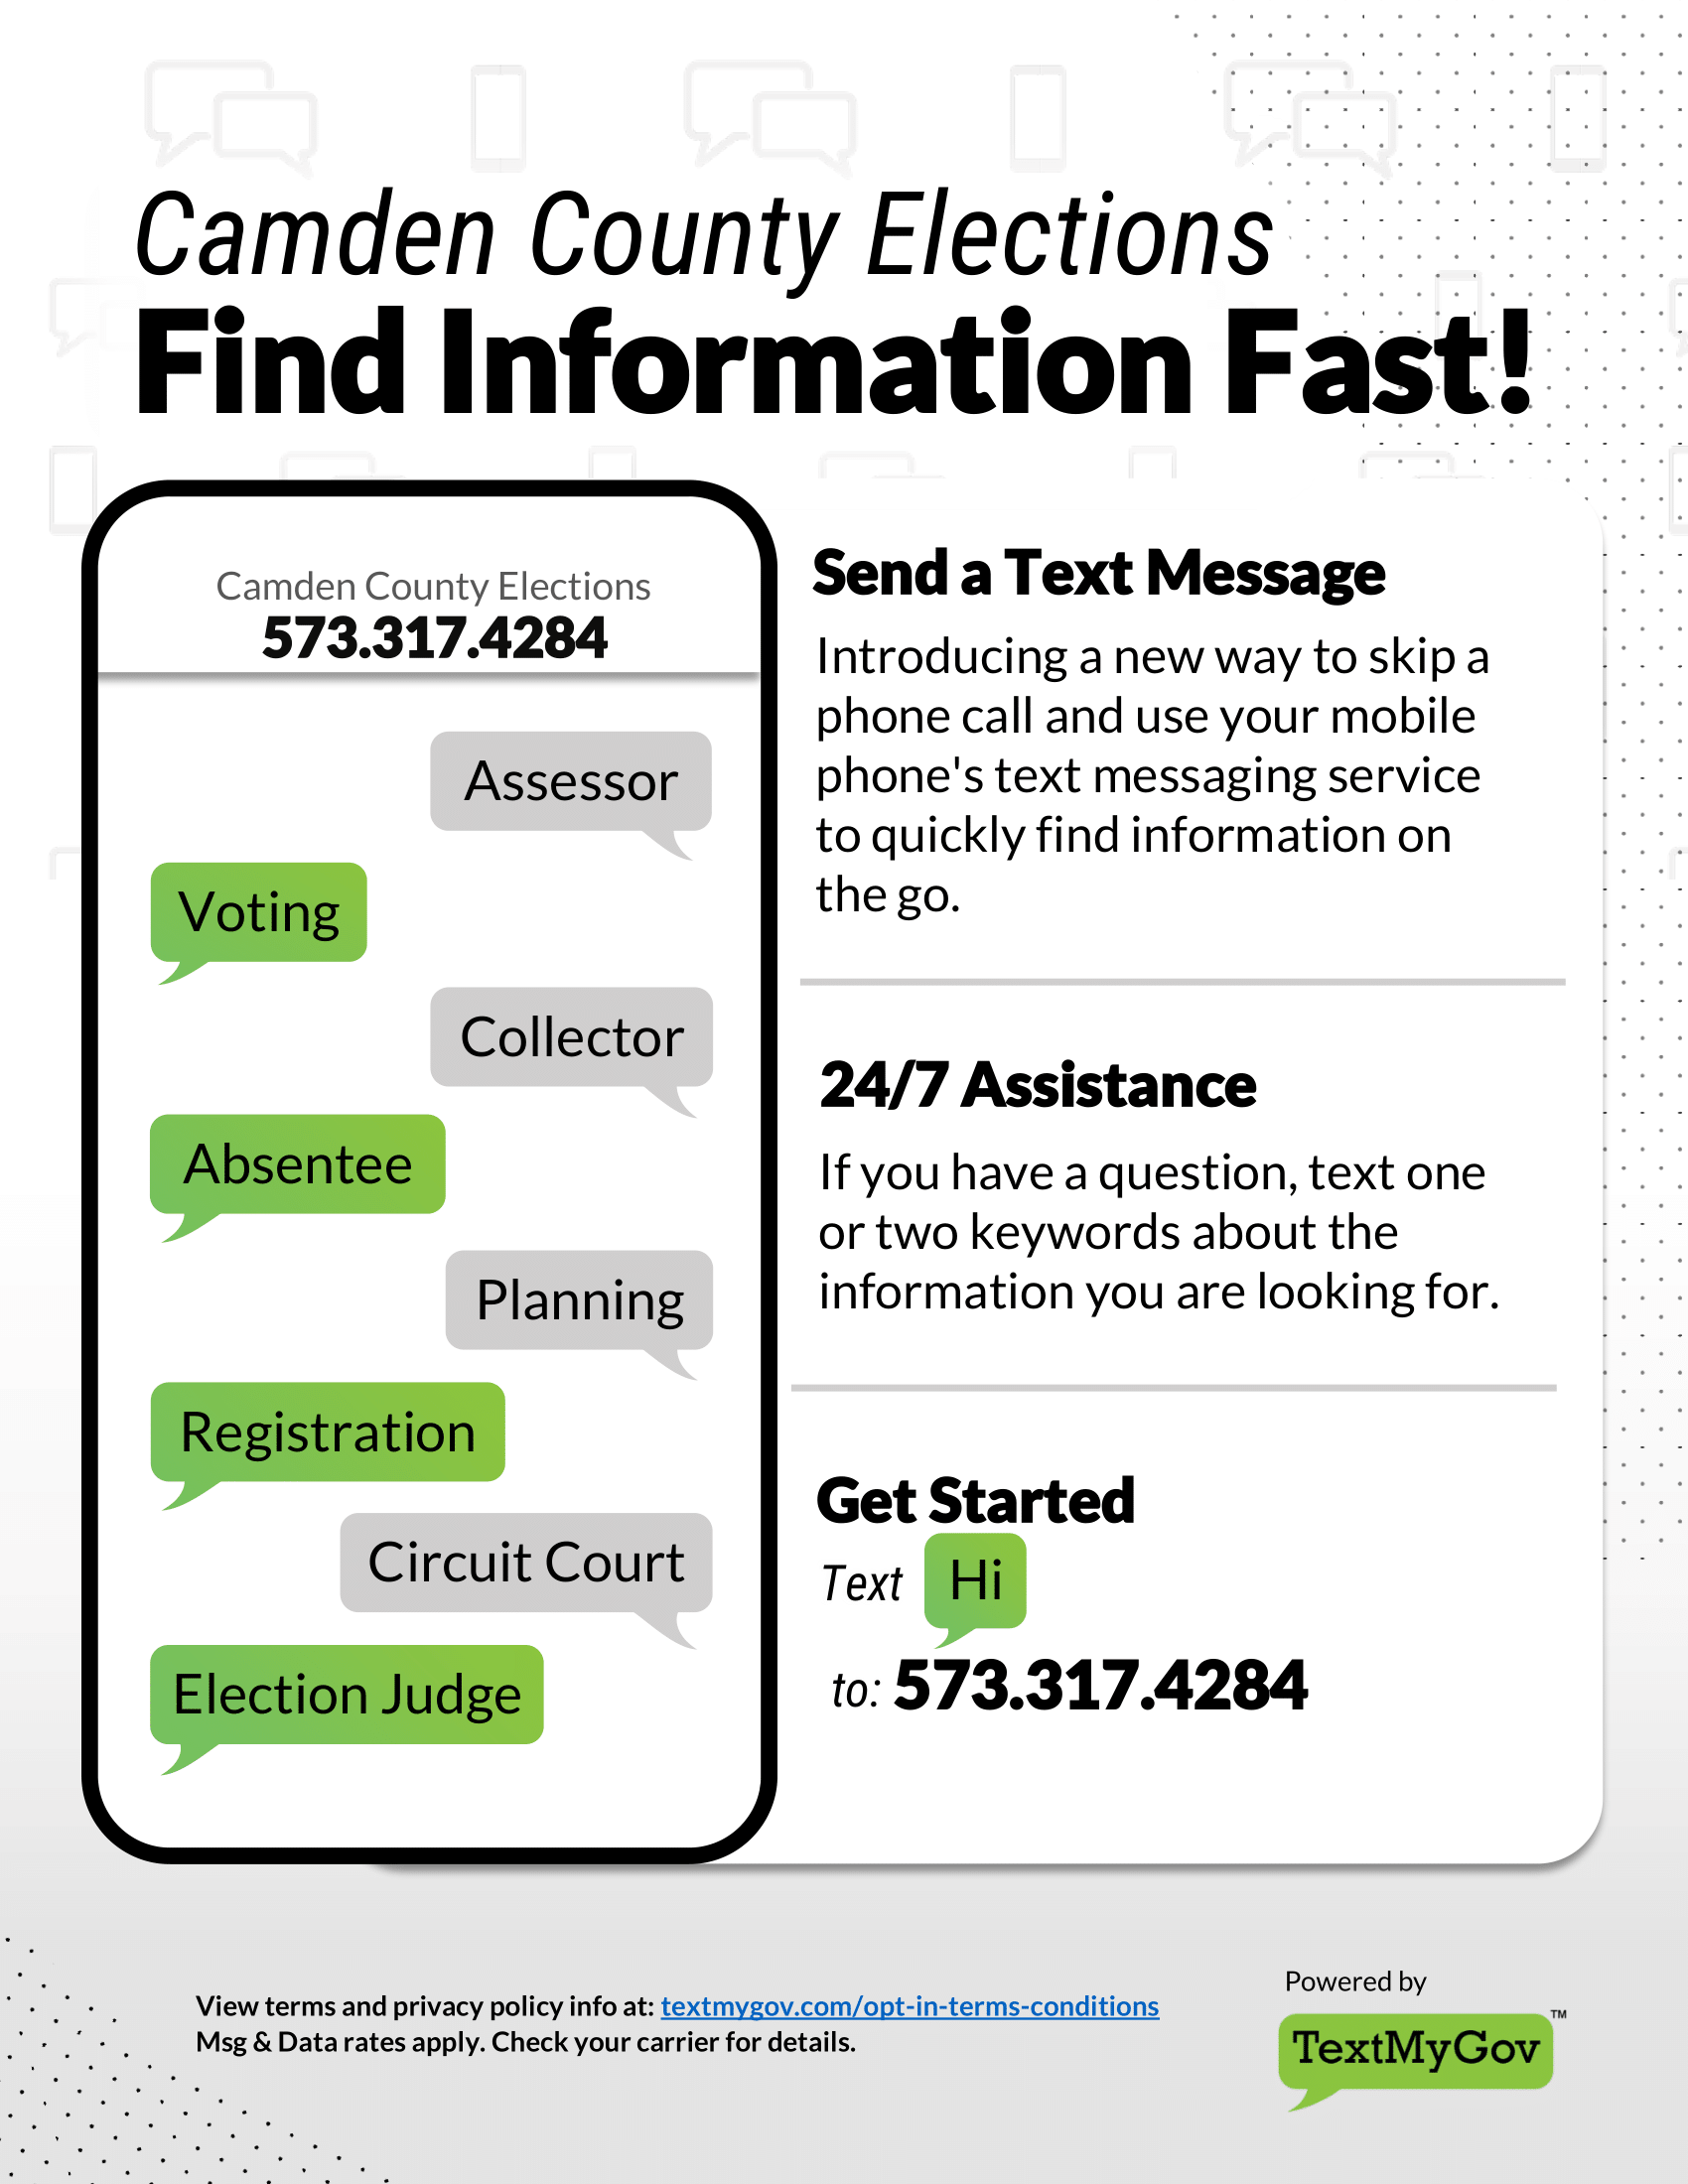 TextMyGov Flyer-Text Hi to the number 573-317-4284